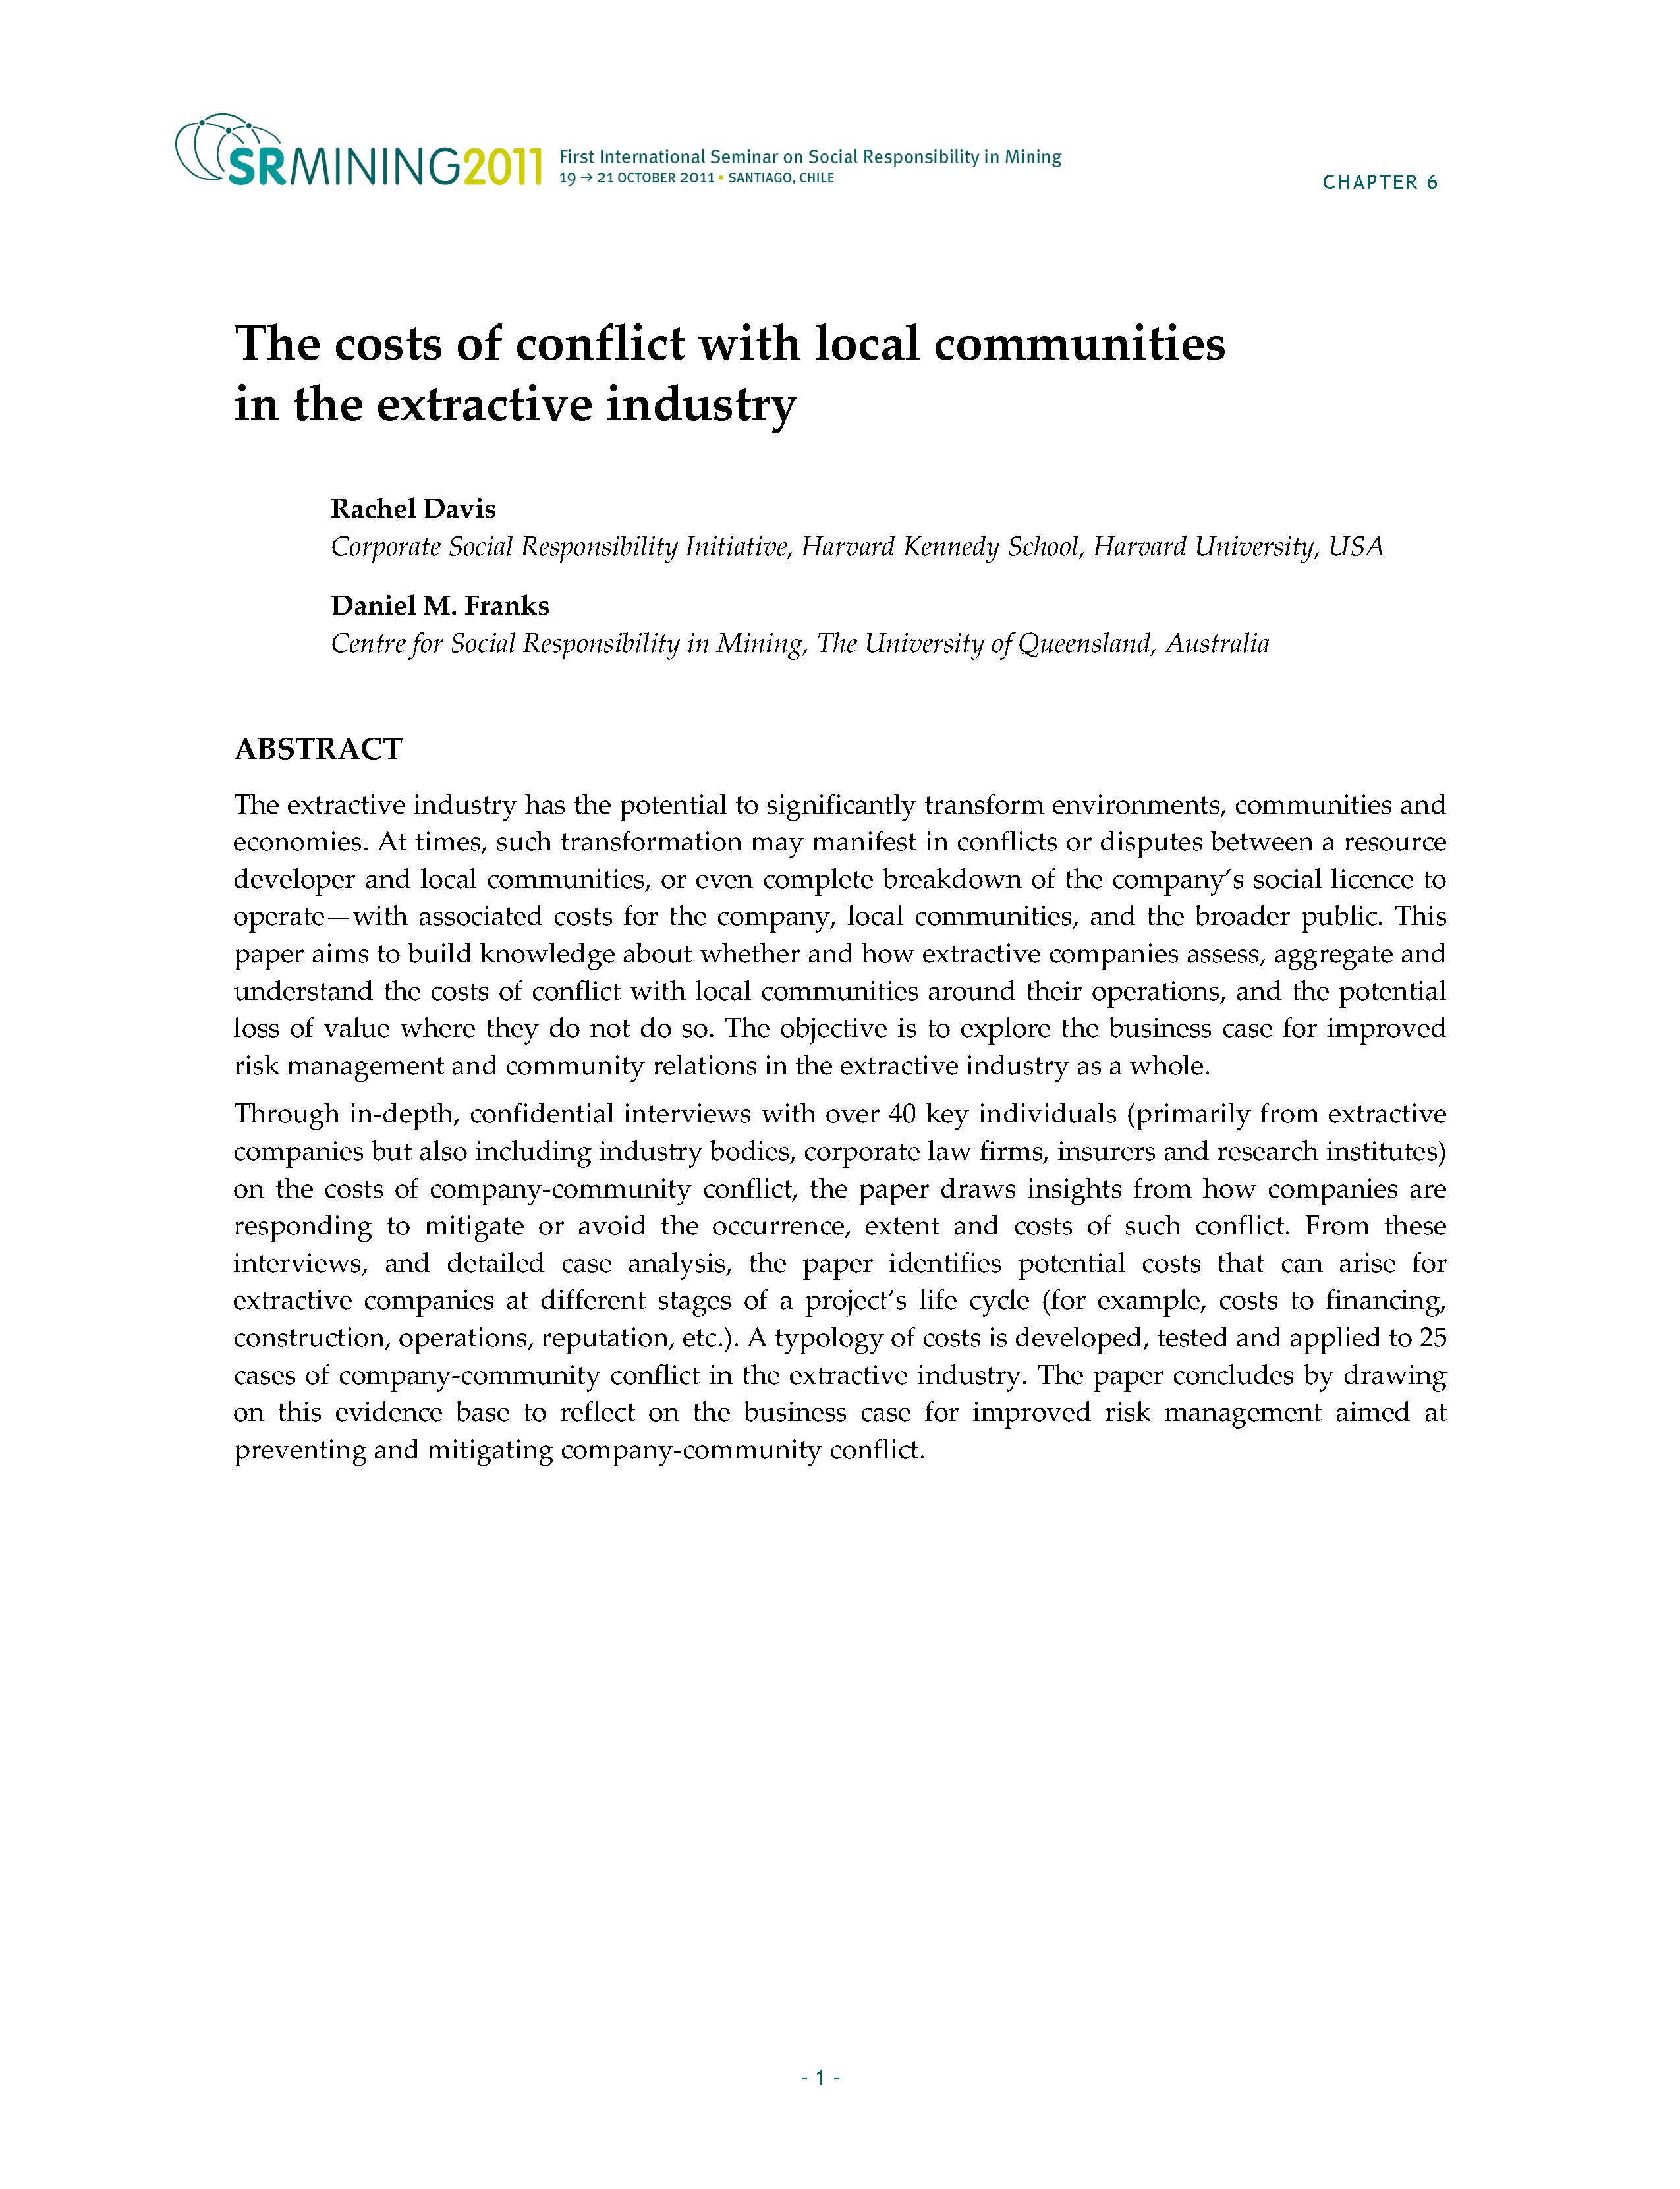 The costs of conflict with local communities in the extractive industry